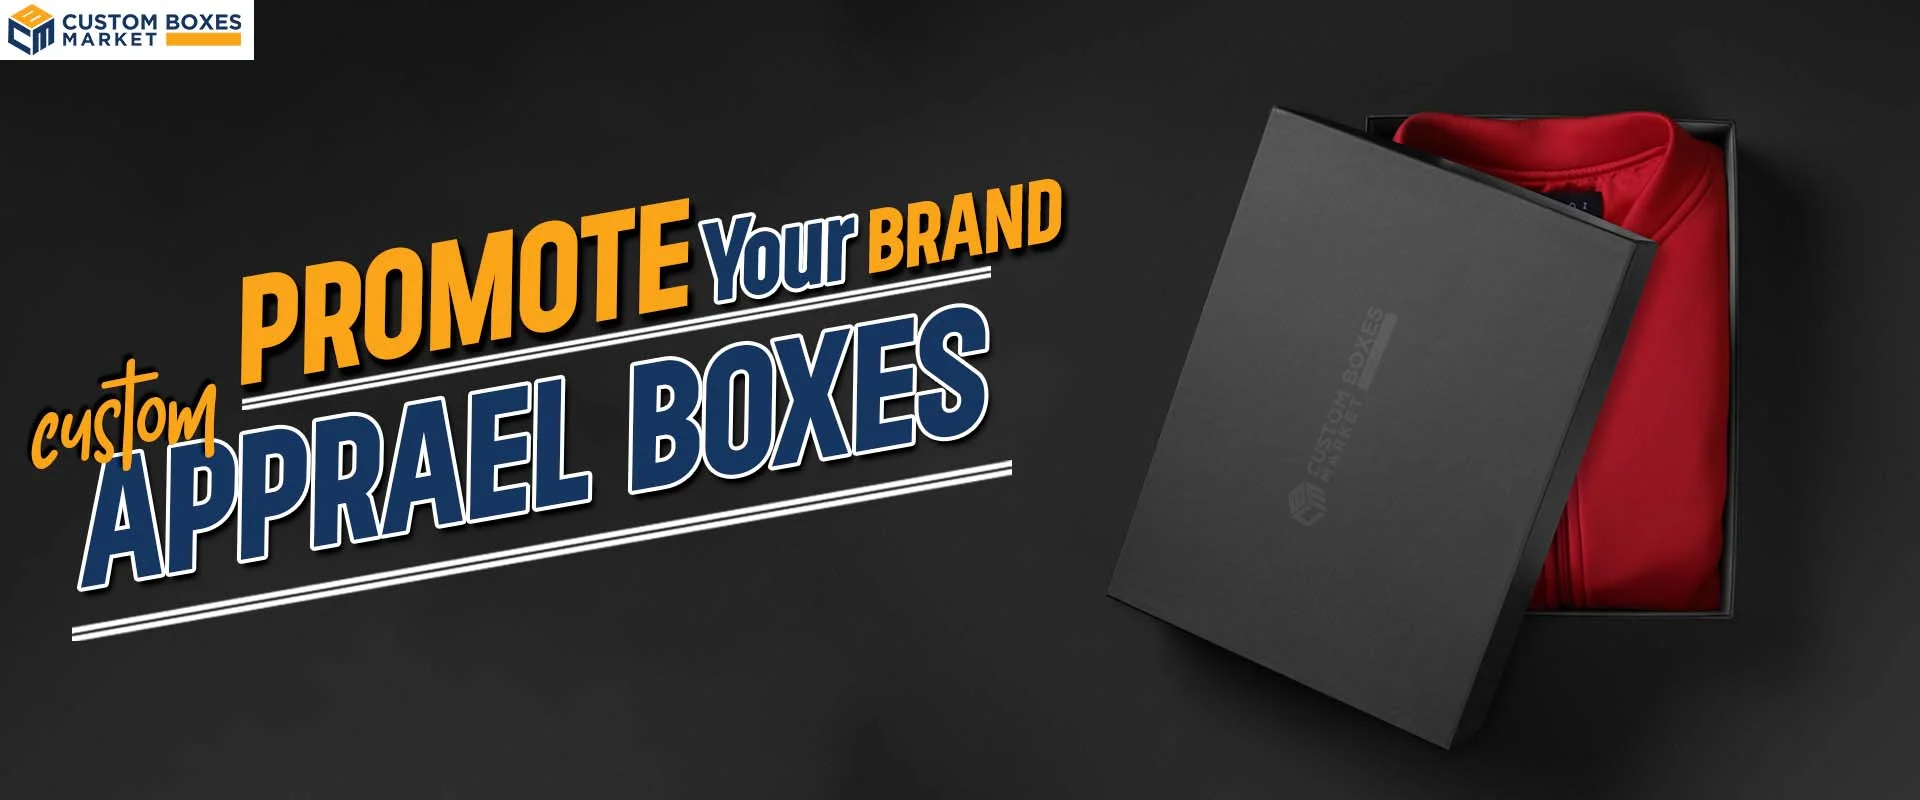 Promote Your Brand With Custom Apparel Boxes